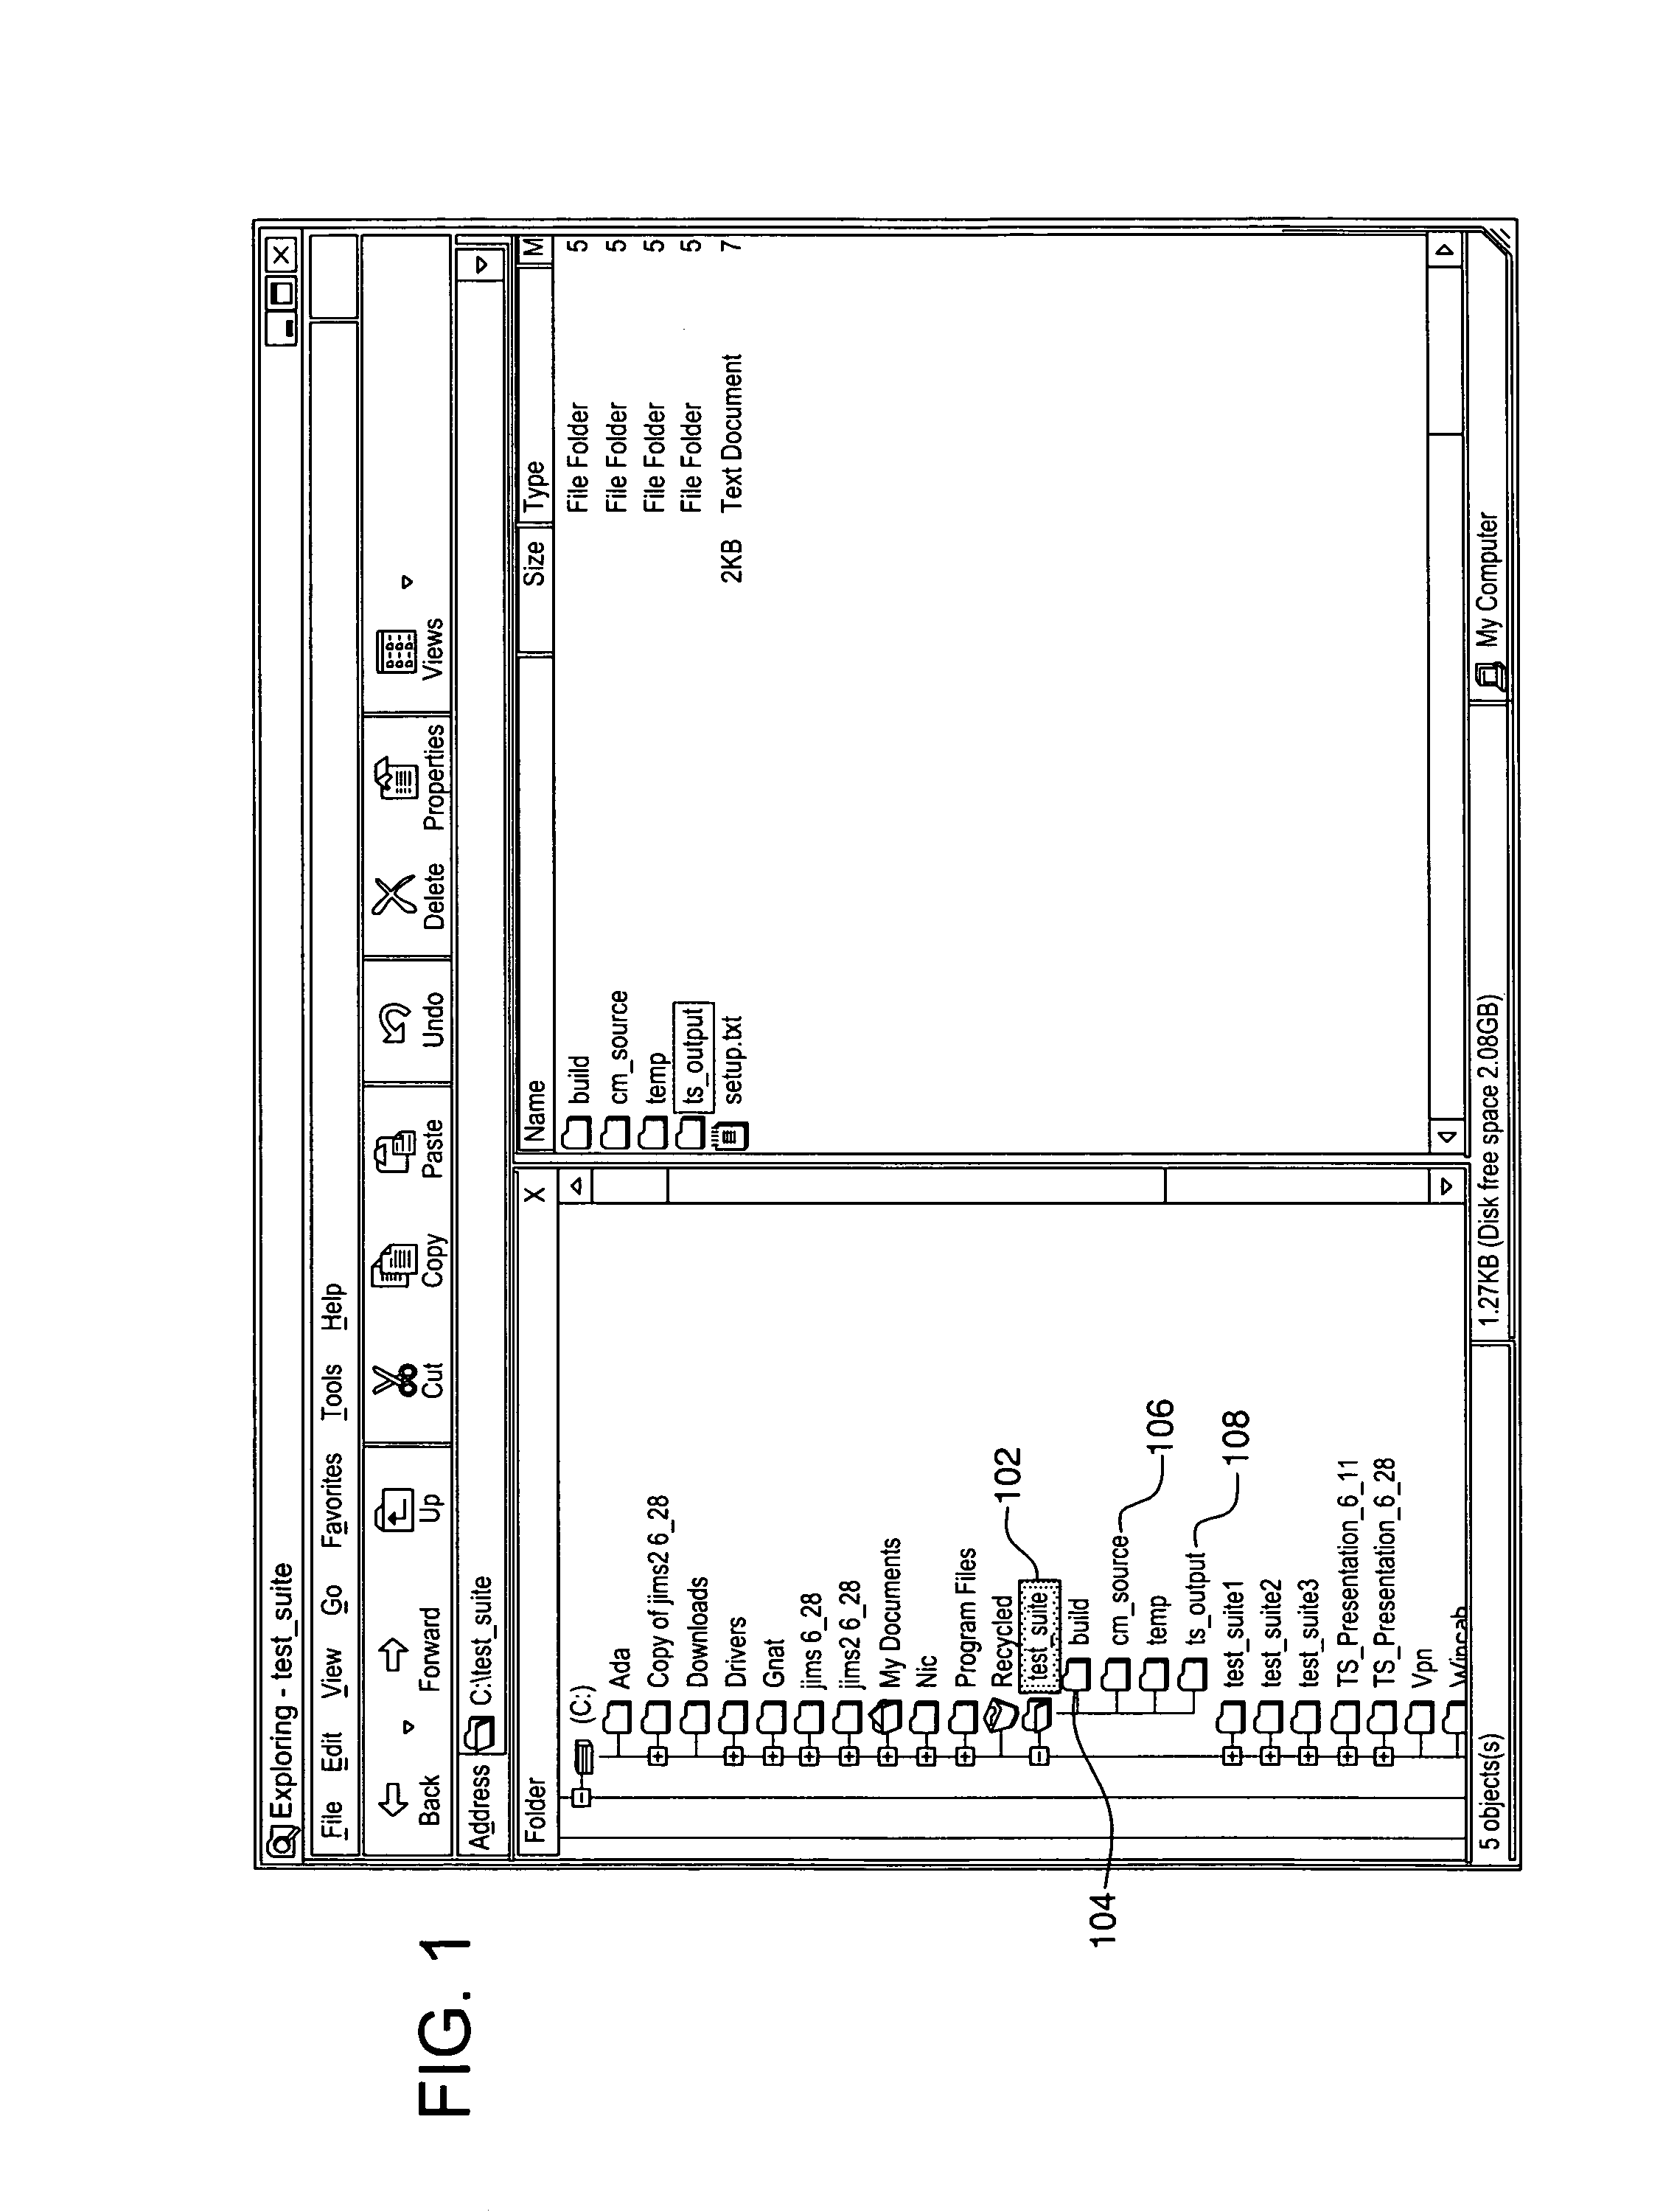 Method and system for object level software testing